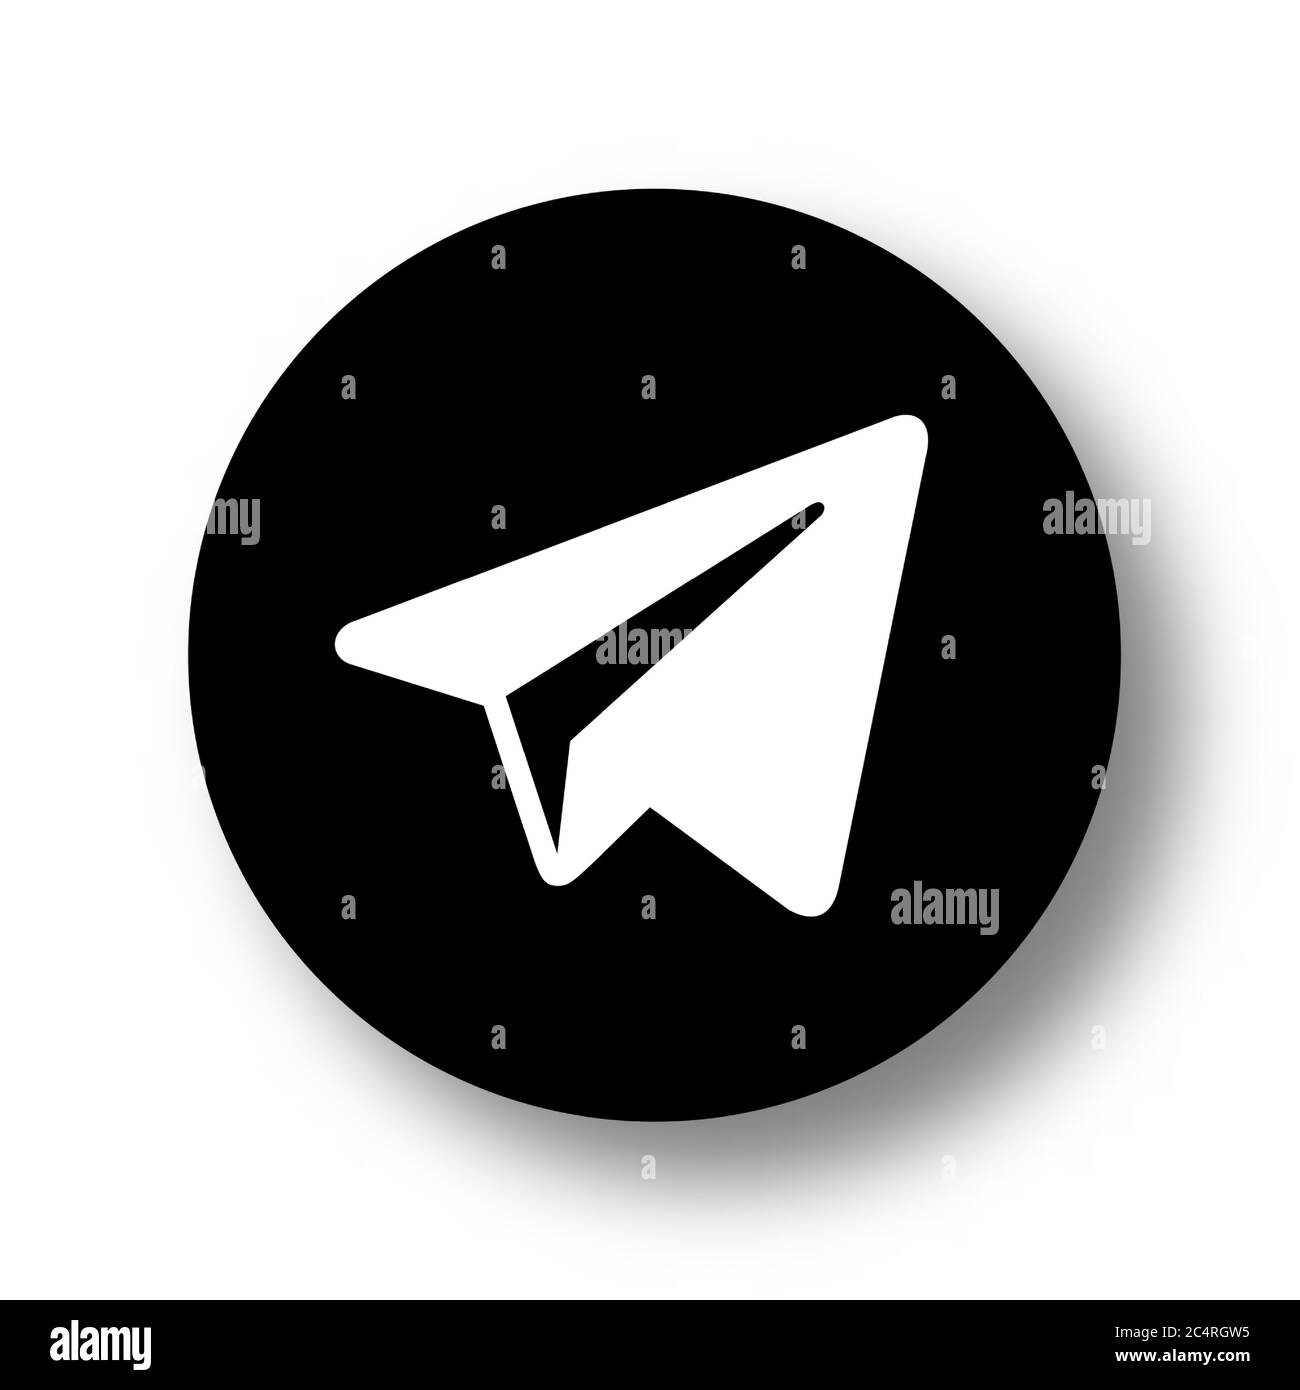 VORONEZH, RUSSIA - JANUARY 31, 2020: Telegram logo black round icon with soft shadow Stock Vector